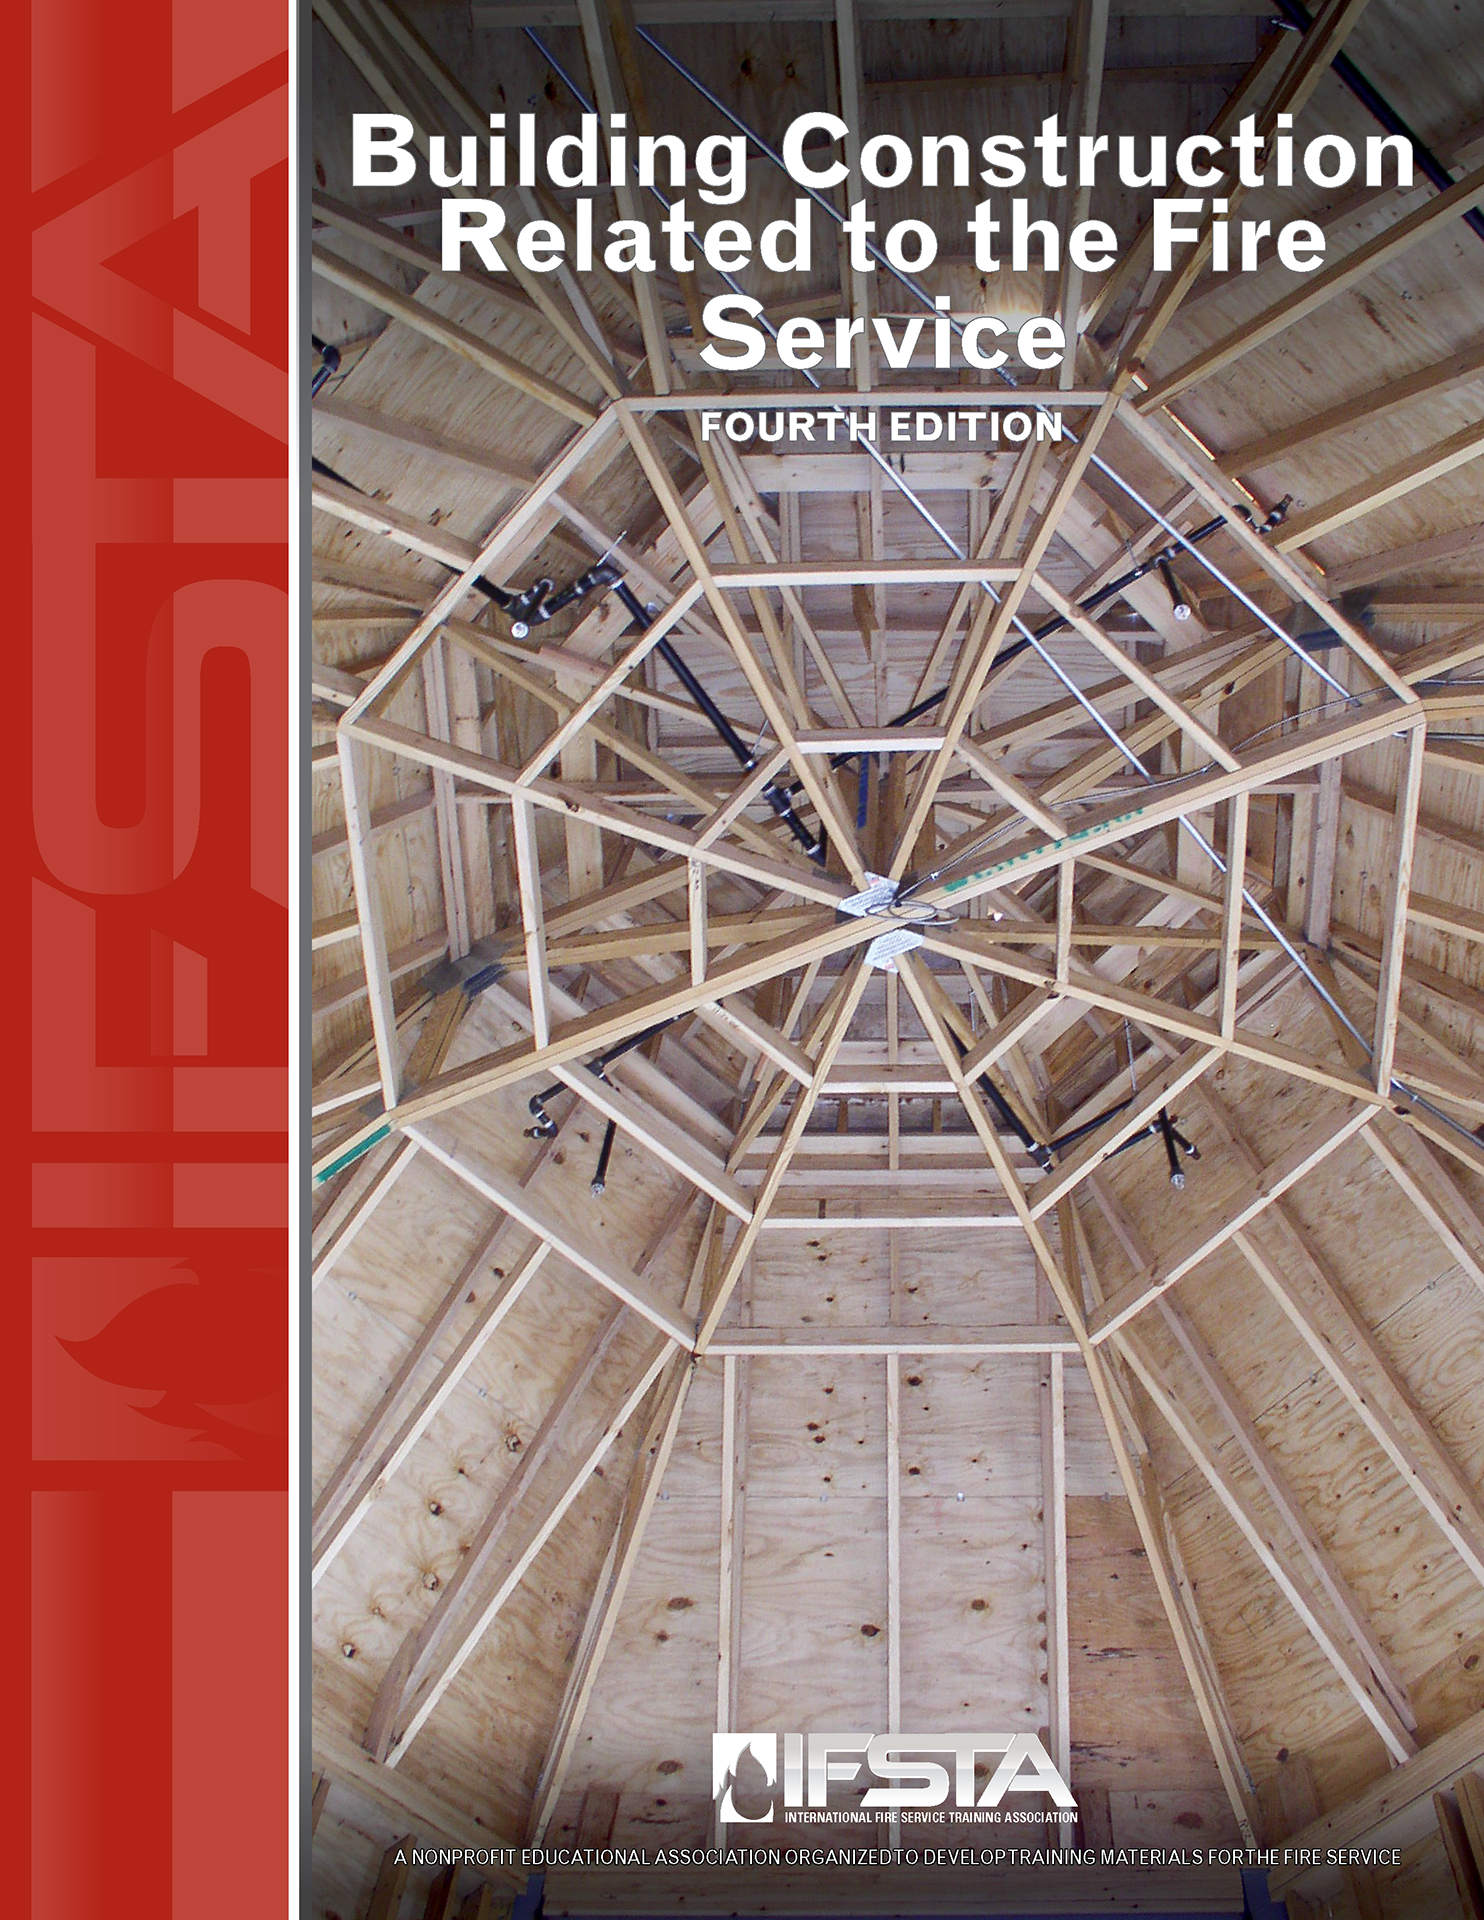 Building Construction Related to the Fire Service, 4th Edition